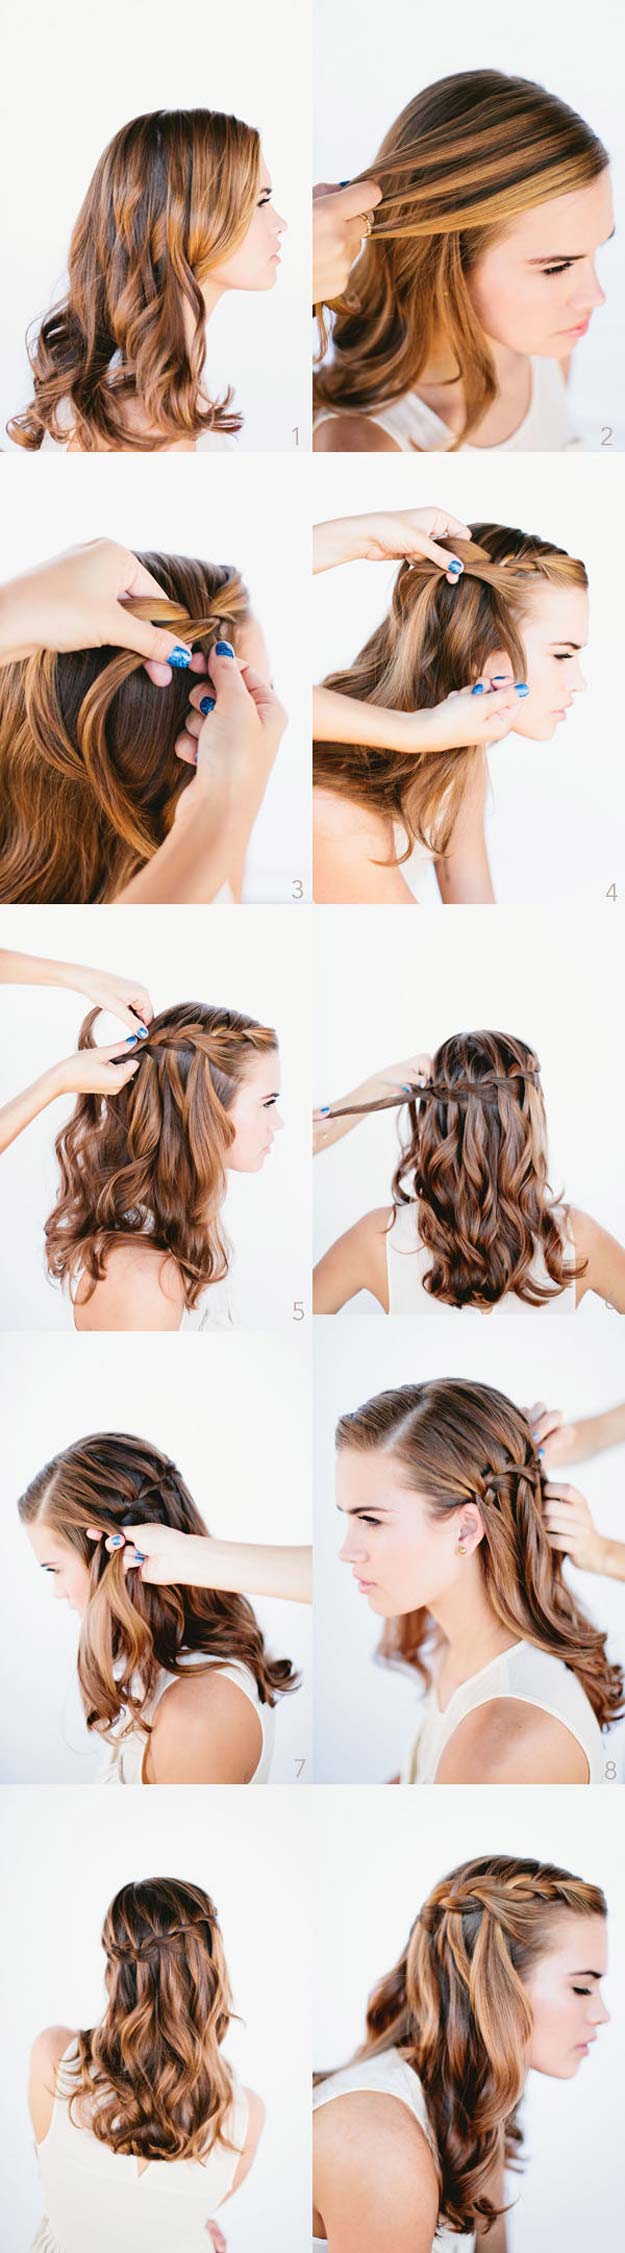 Best Hair Braiding Tutorials - Waterfall Braid Wedding Hairstyles For Long Hair - Easy Step by Step Tutorials for Braids - How To Braid Fishtail, French Braids, Flower Crown, Side Braids, Cornrows, Updos - Cool Braided Hairstyles for Girls, Teens and Women - School, Day and Evening, Boho, Casual and Formal Looks #hairstyles #braiding #braidingtutorials #diyhair 